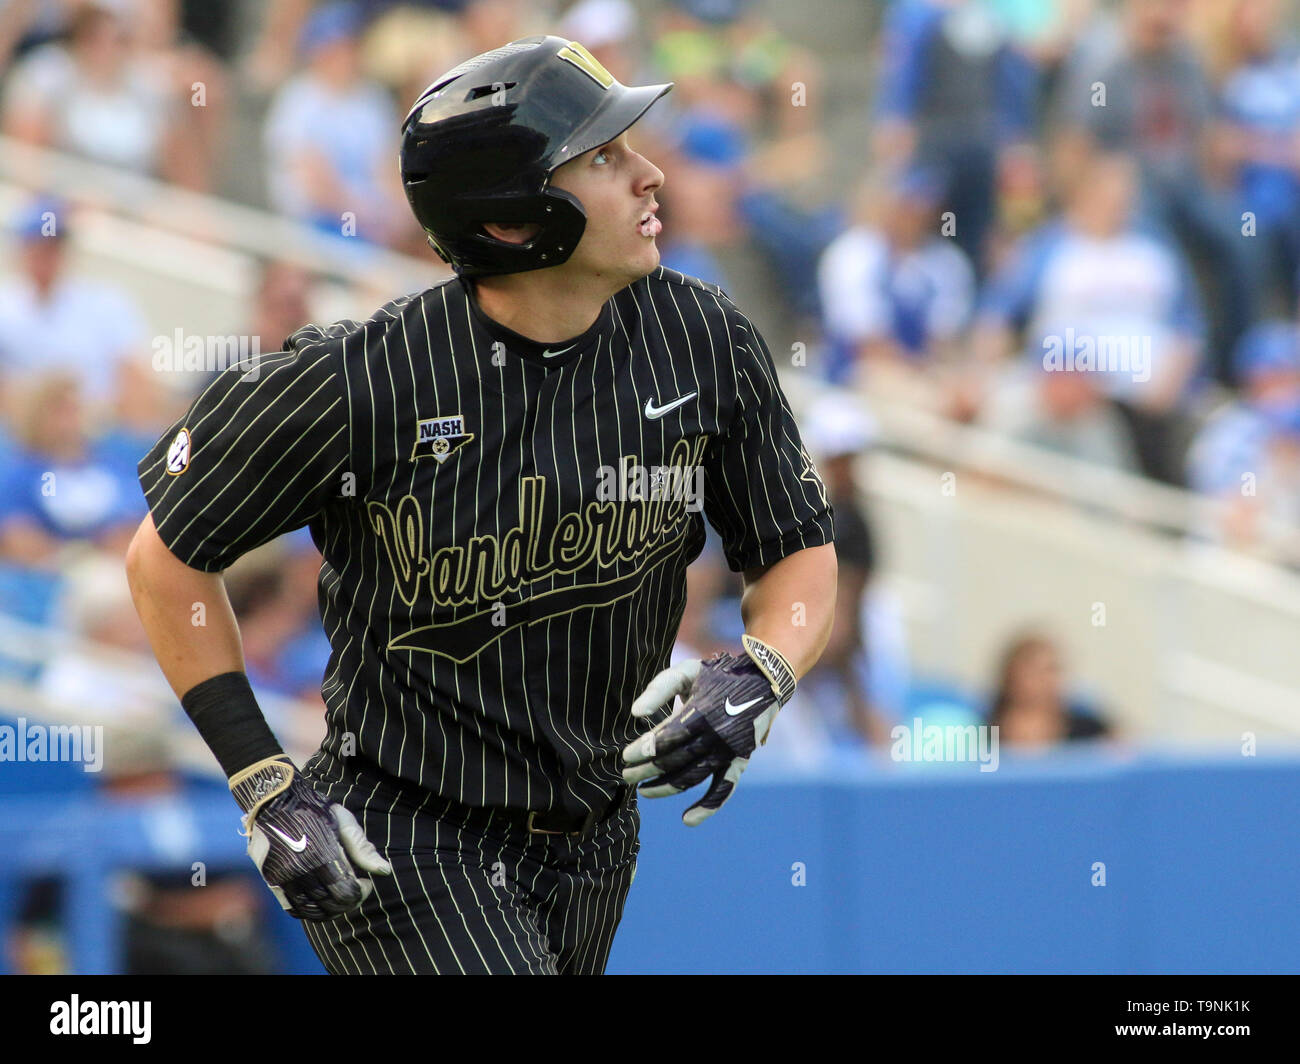 Lexington, KY, USA. 17th May, 2019. Vanderbilt's JJ Bleday watches his home run leave the park during a game between the Kentucky Wildcats and the Vanderbilt Commodores at Kentucky Pride Park in Lexington, KY. Kevin Schultz/CSM/Alamy Live News Stock Photo